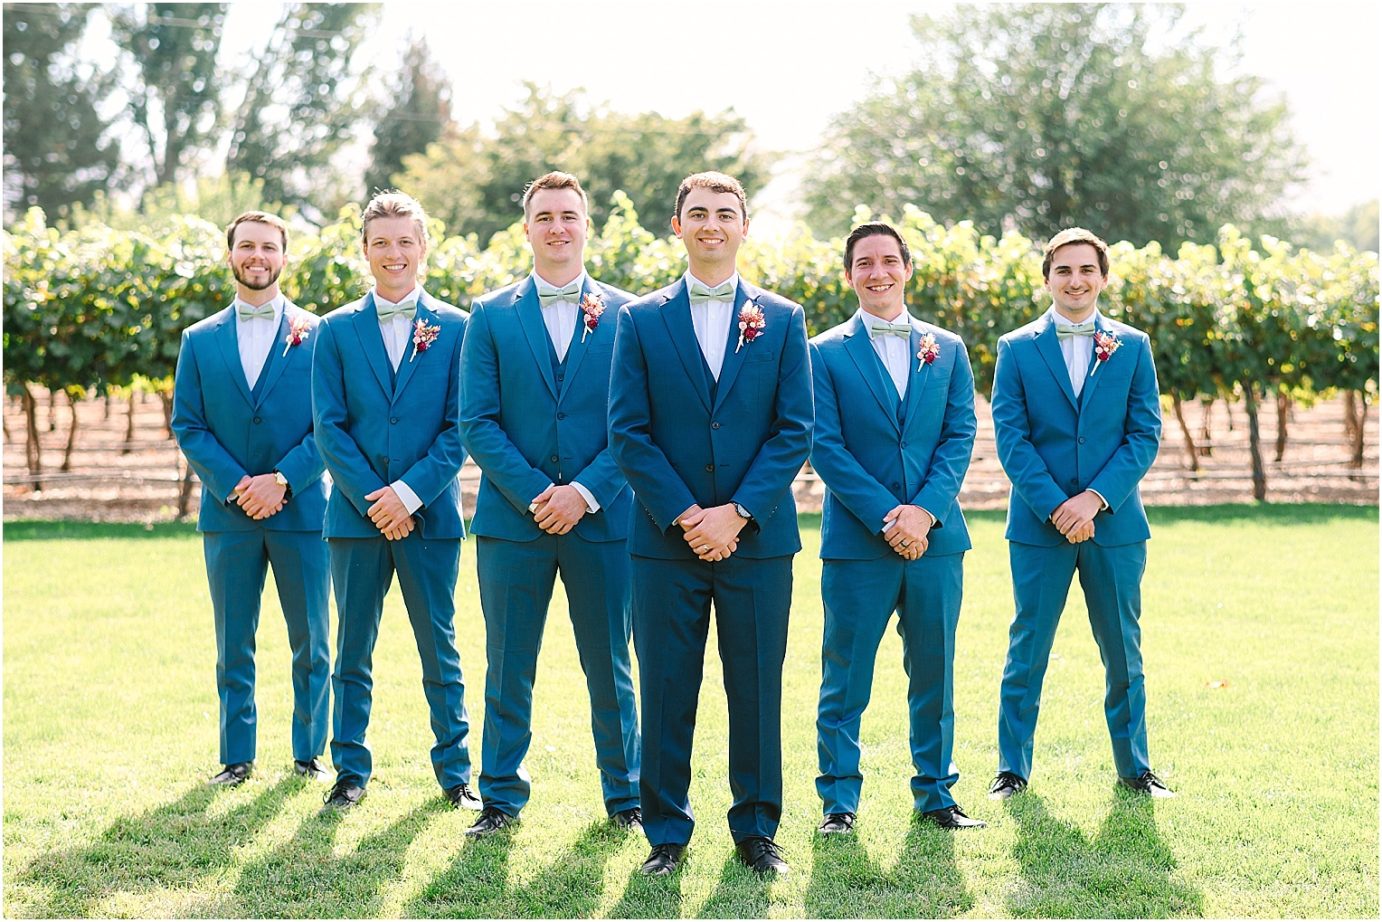 Wedding at Sugar Pine Barn - groom and groomsmen wearing navy tux with fall colored boutonniere